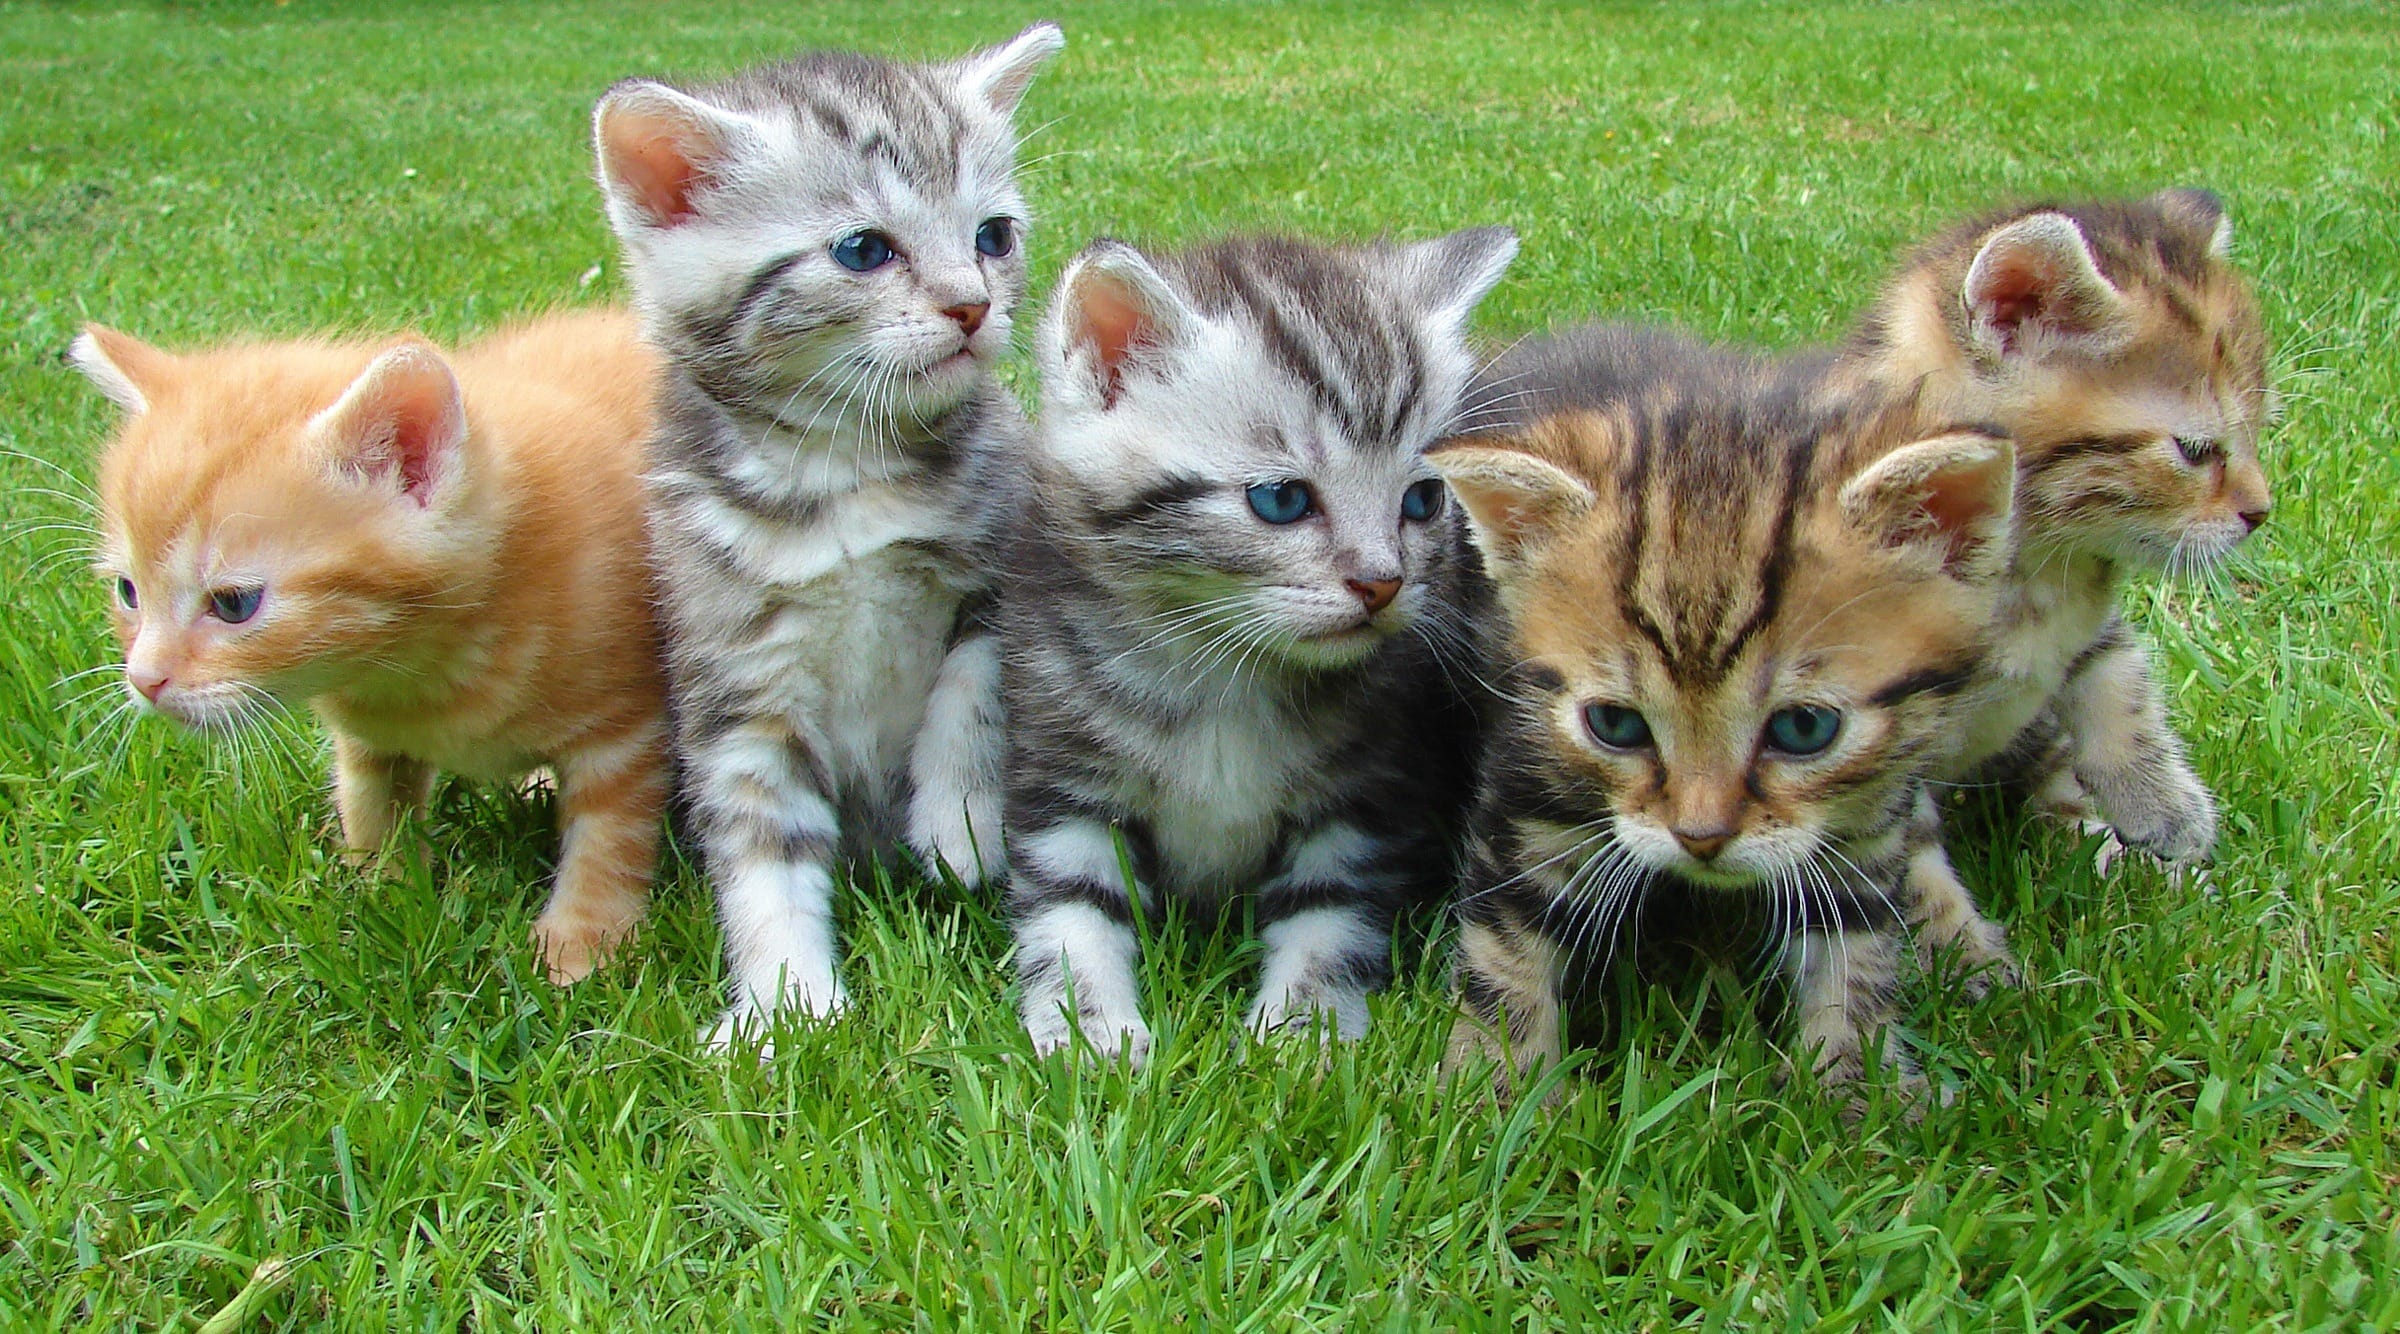 5 kittens looking cute in the grass